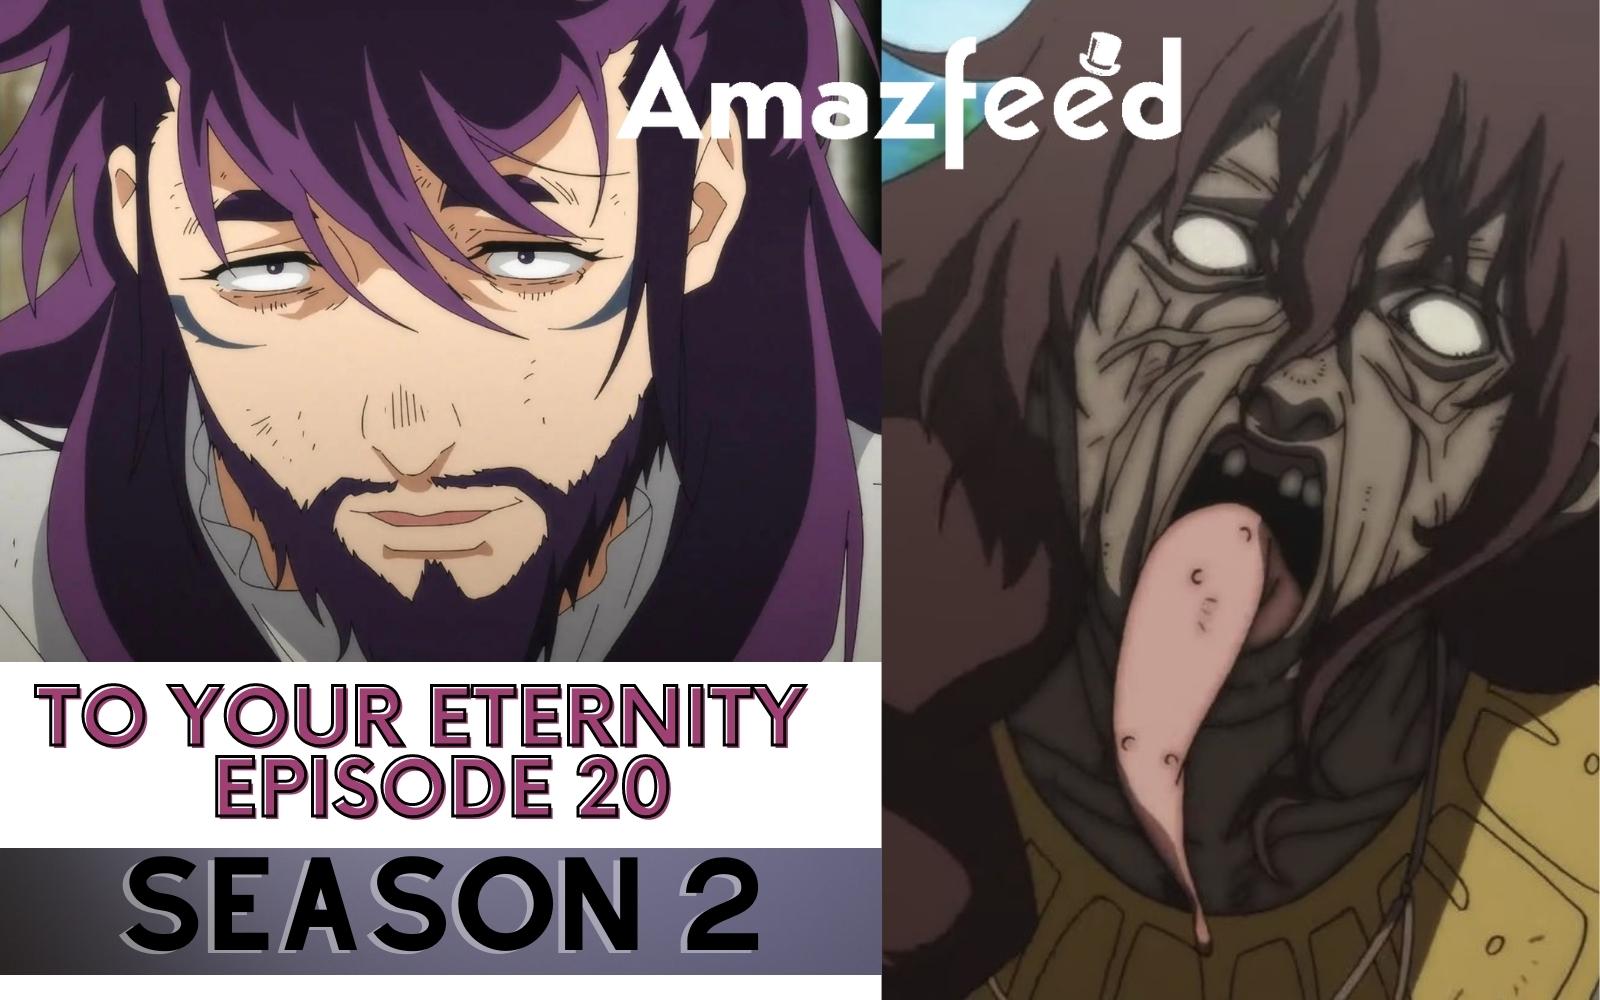 To Your Eternity Season 2 Episode 20 - Anime Series Review